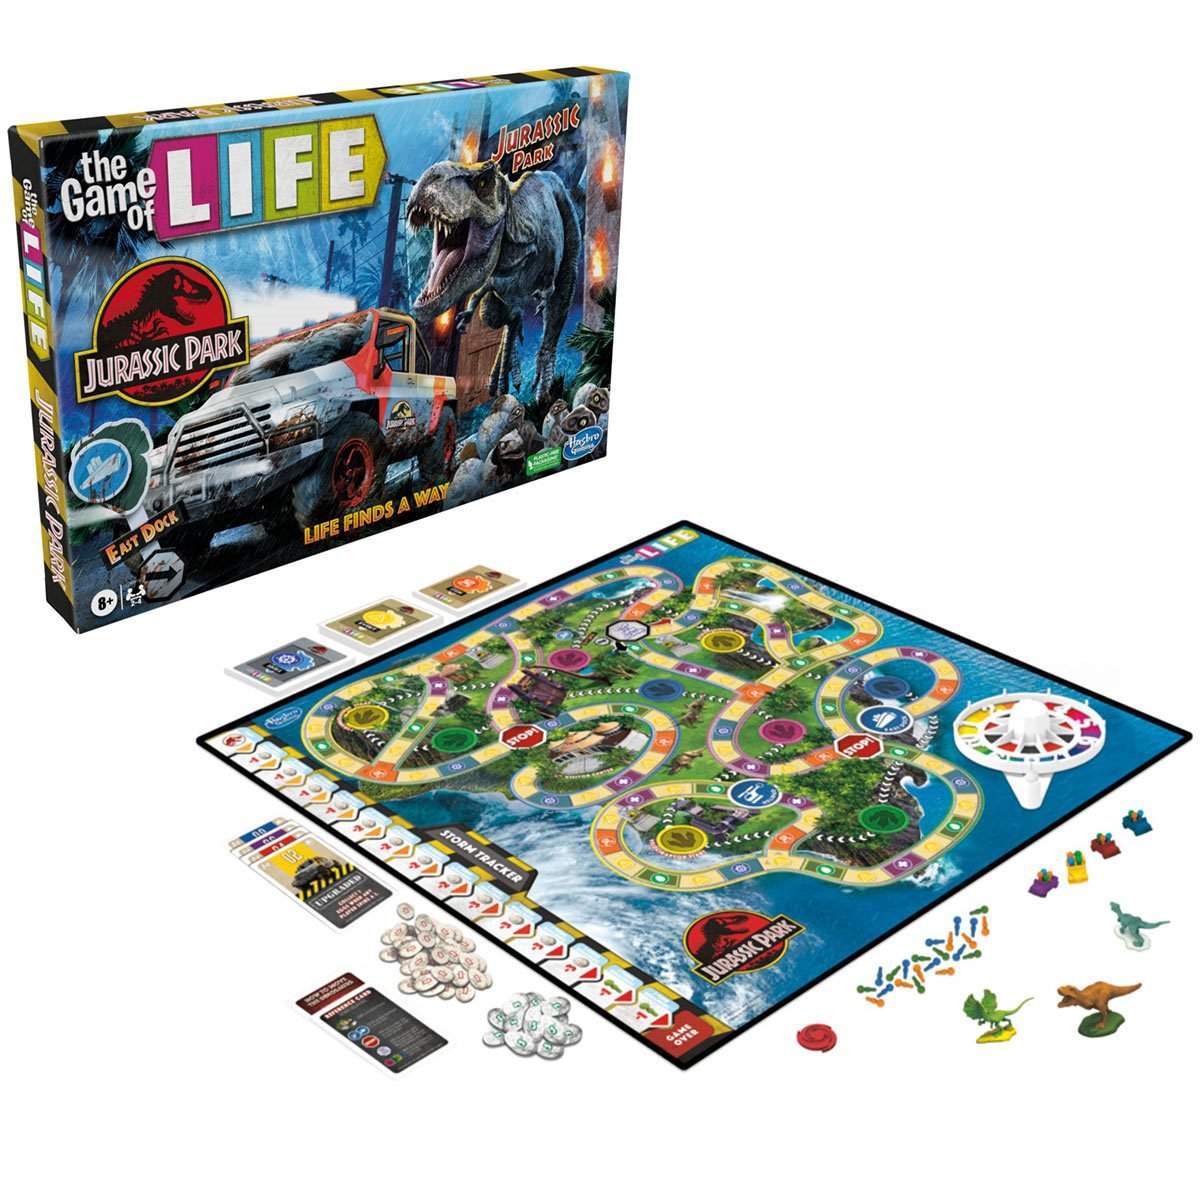  Hasbro The Game of Life: Twists & Turns Electronic Edition -  Board Game : Toys & Games